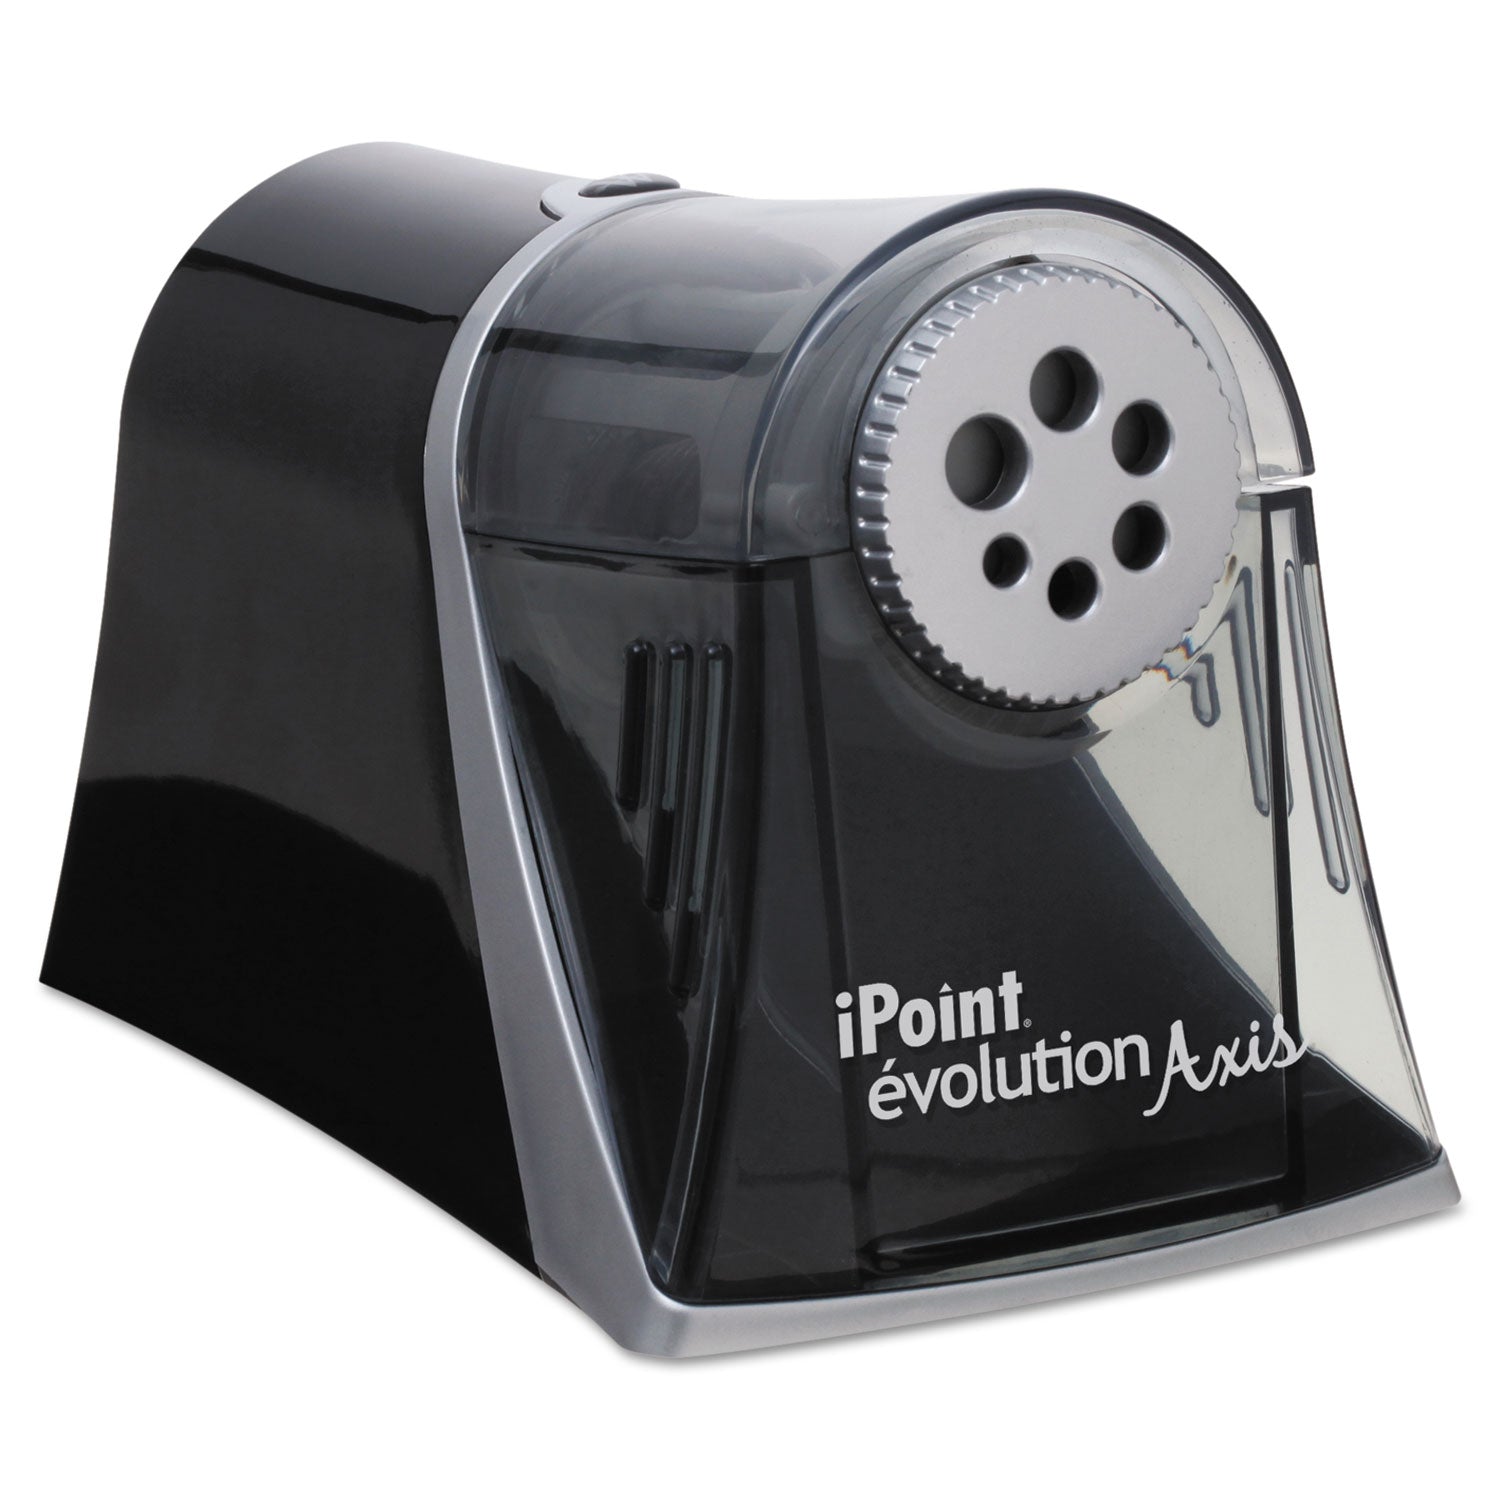 iPoint Evolution Axis Pencil Sharpener, AC-Powered, 5 x 7.5 x 7.25, Black/Silver - 